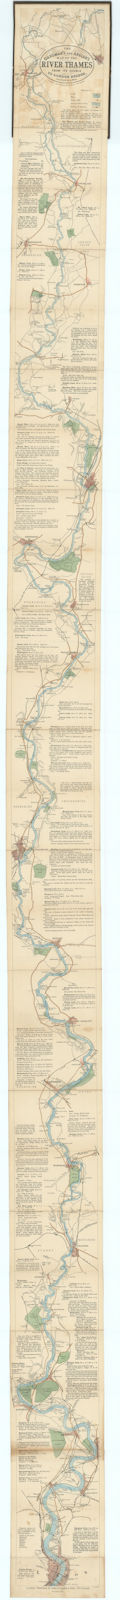 Associate Product The Oarsman's & Angler's Map of the River Thames 135x9cm Leporello REYNOLDS 1881